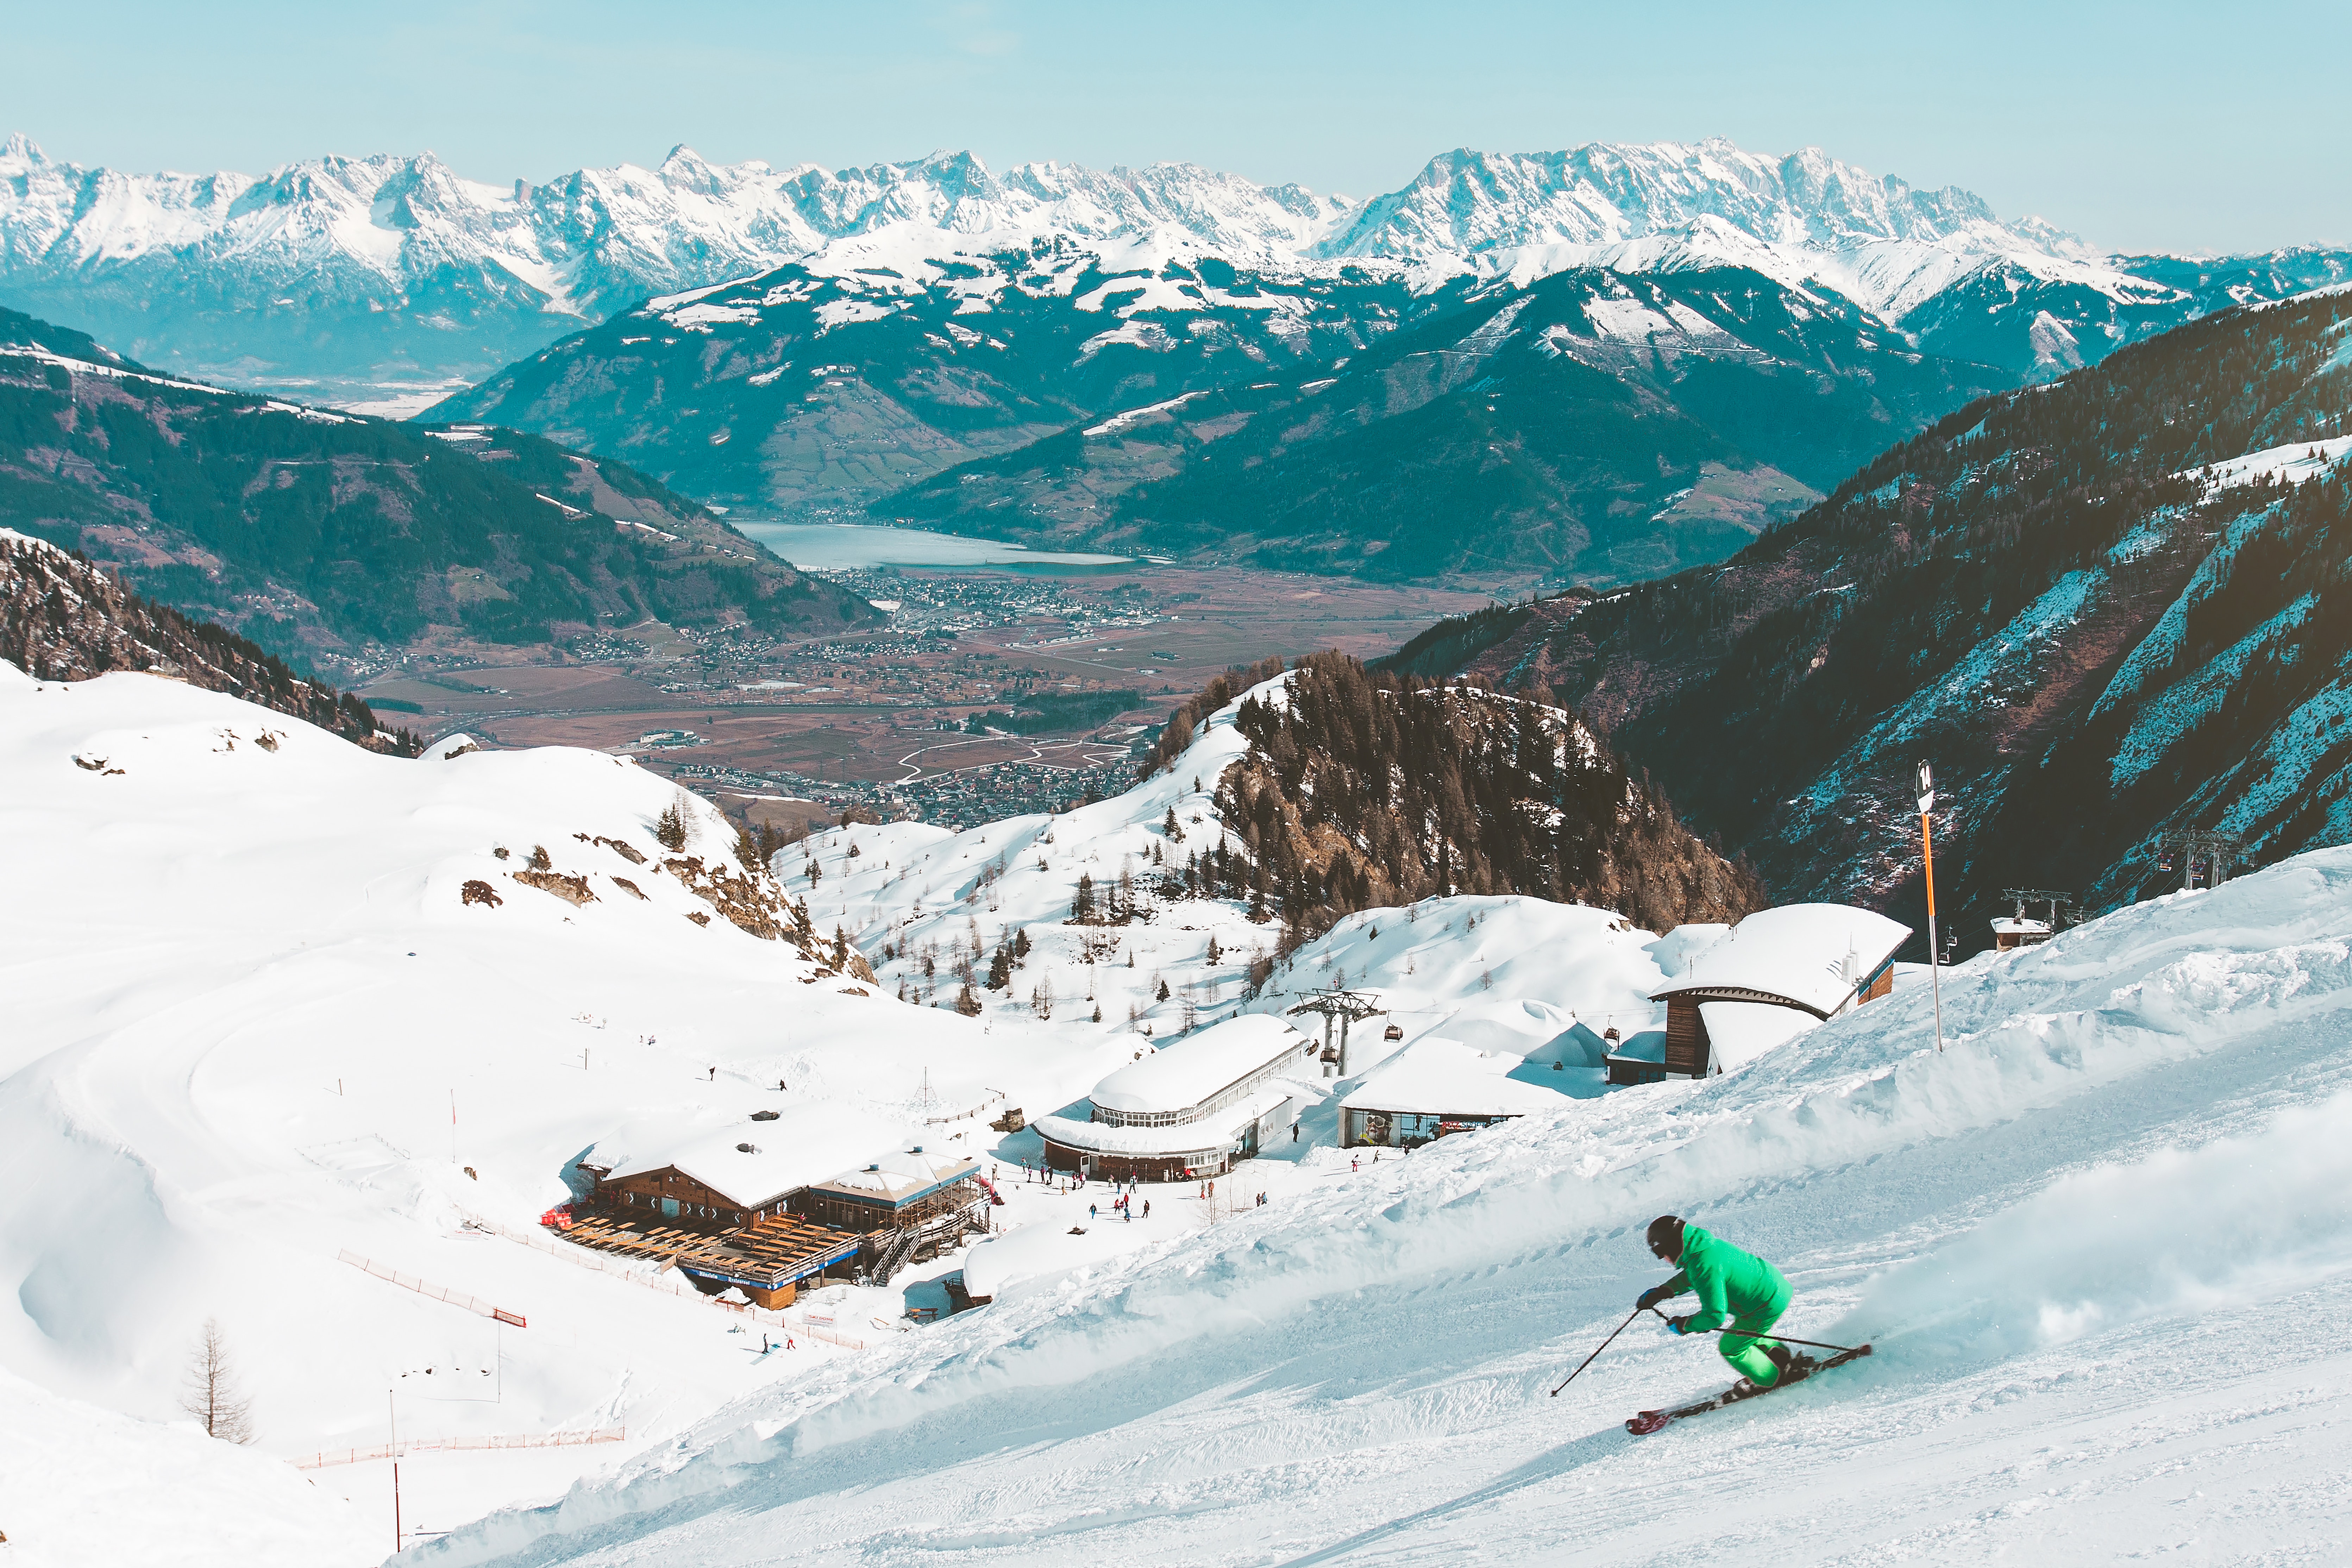 Top 4 Exercises To Do Before a Skiing Holiday